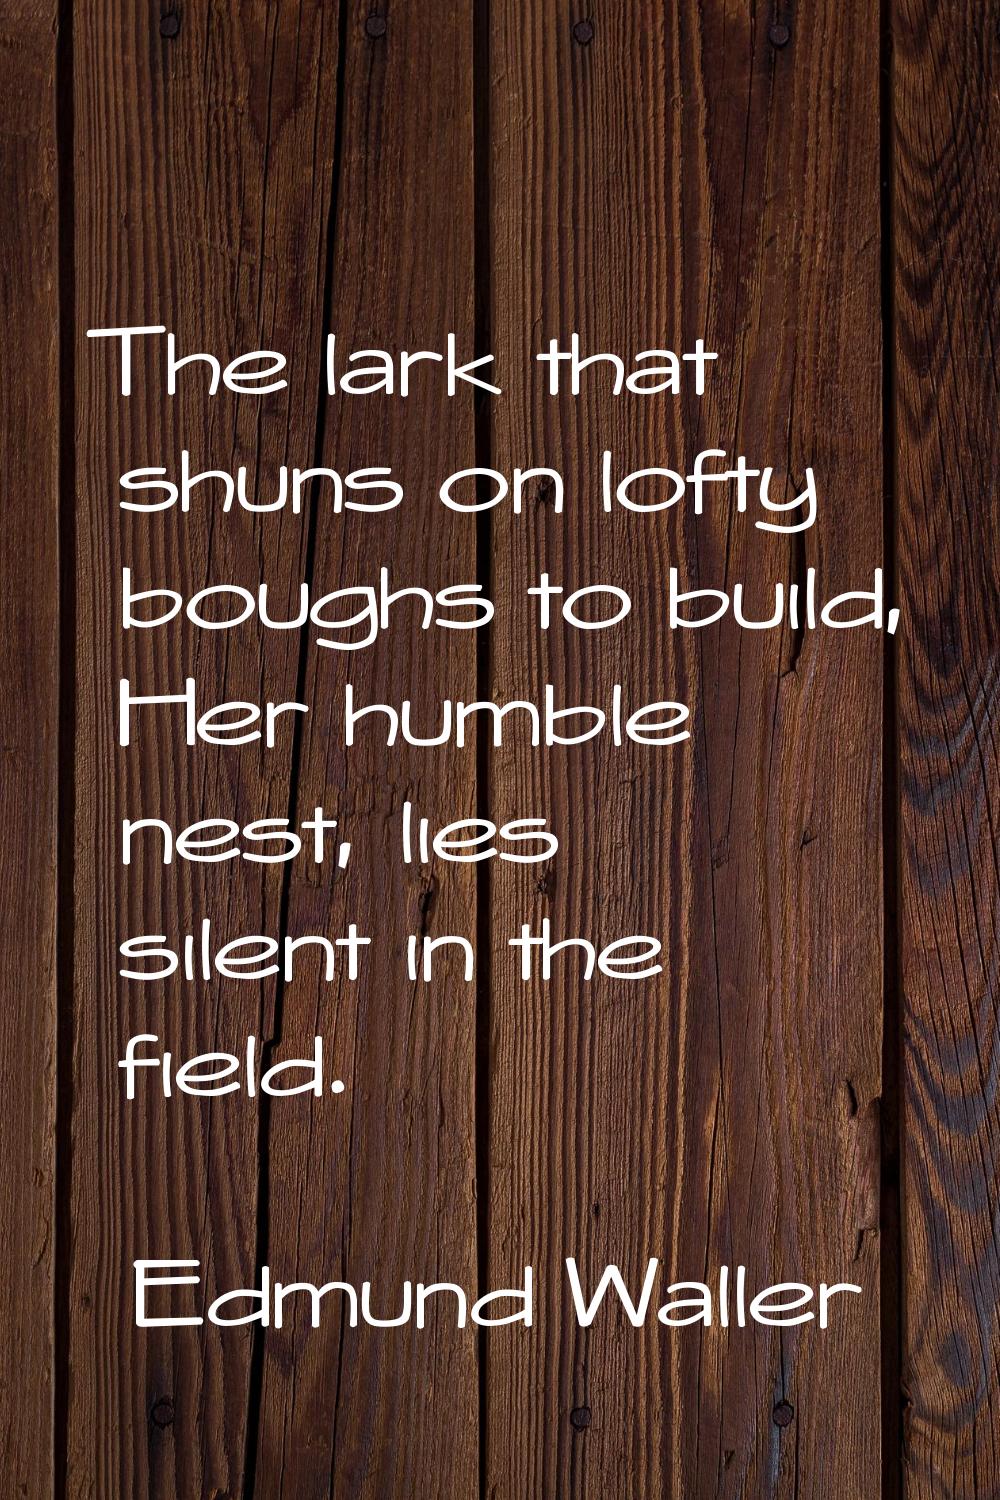 The lark that shuns on lofty boughs to build, Her humble nest, lies silent in the field.